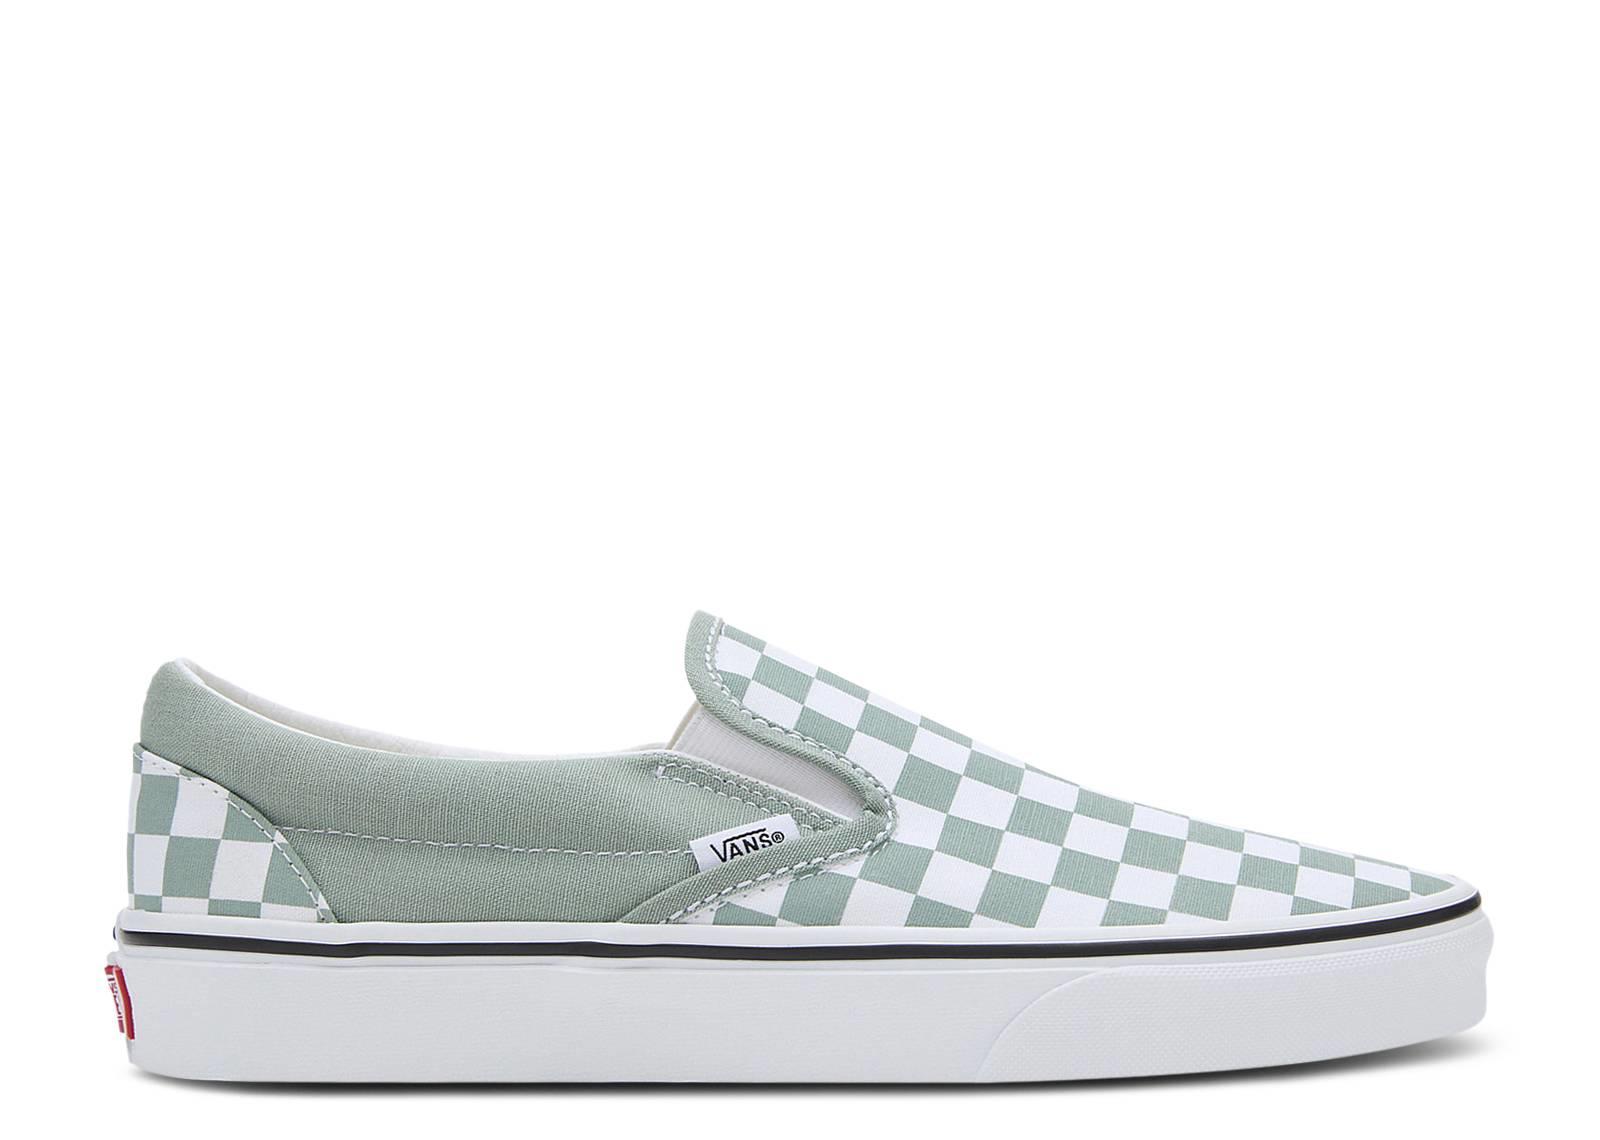 Vans Classic Slip On Color Theory Checkerboard Iceberg S Size 10 VN000BVZCJL